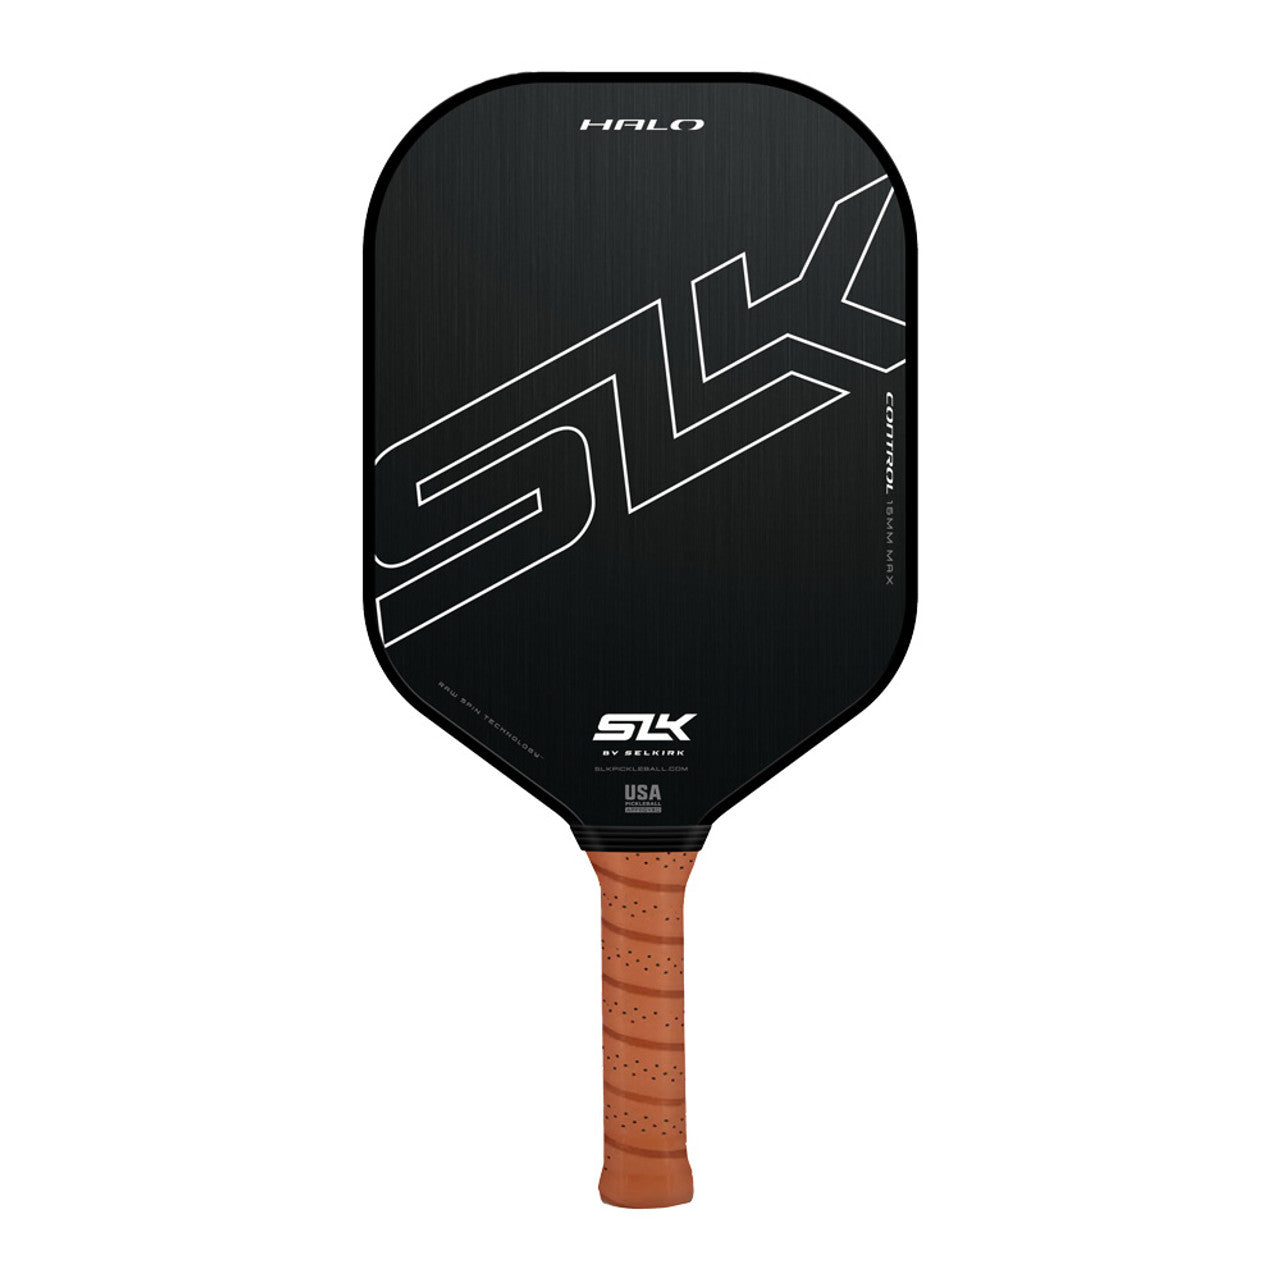 A Selkirk SLK Halo XL Pickleball Paddle in black and brown on a white background. (Brand: Selkirk)